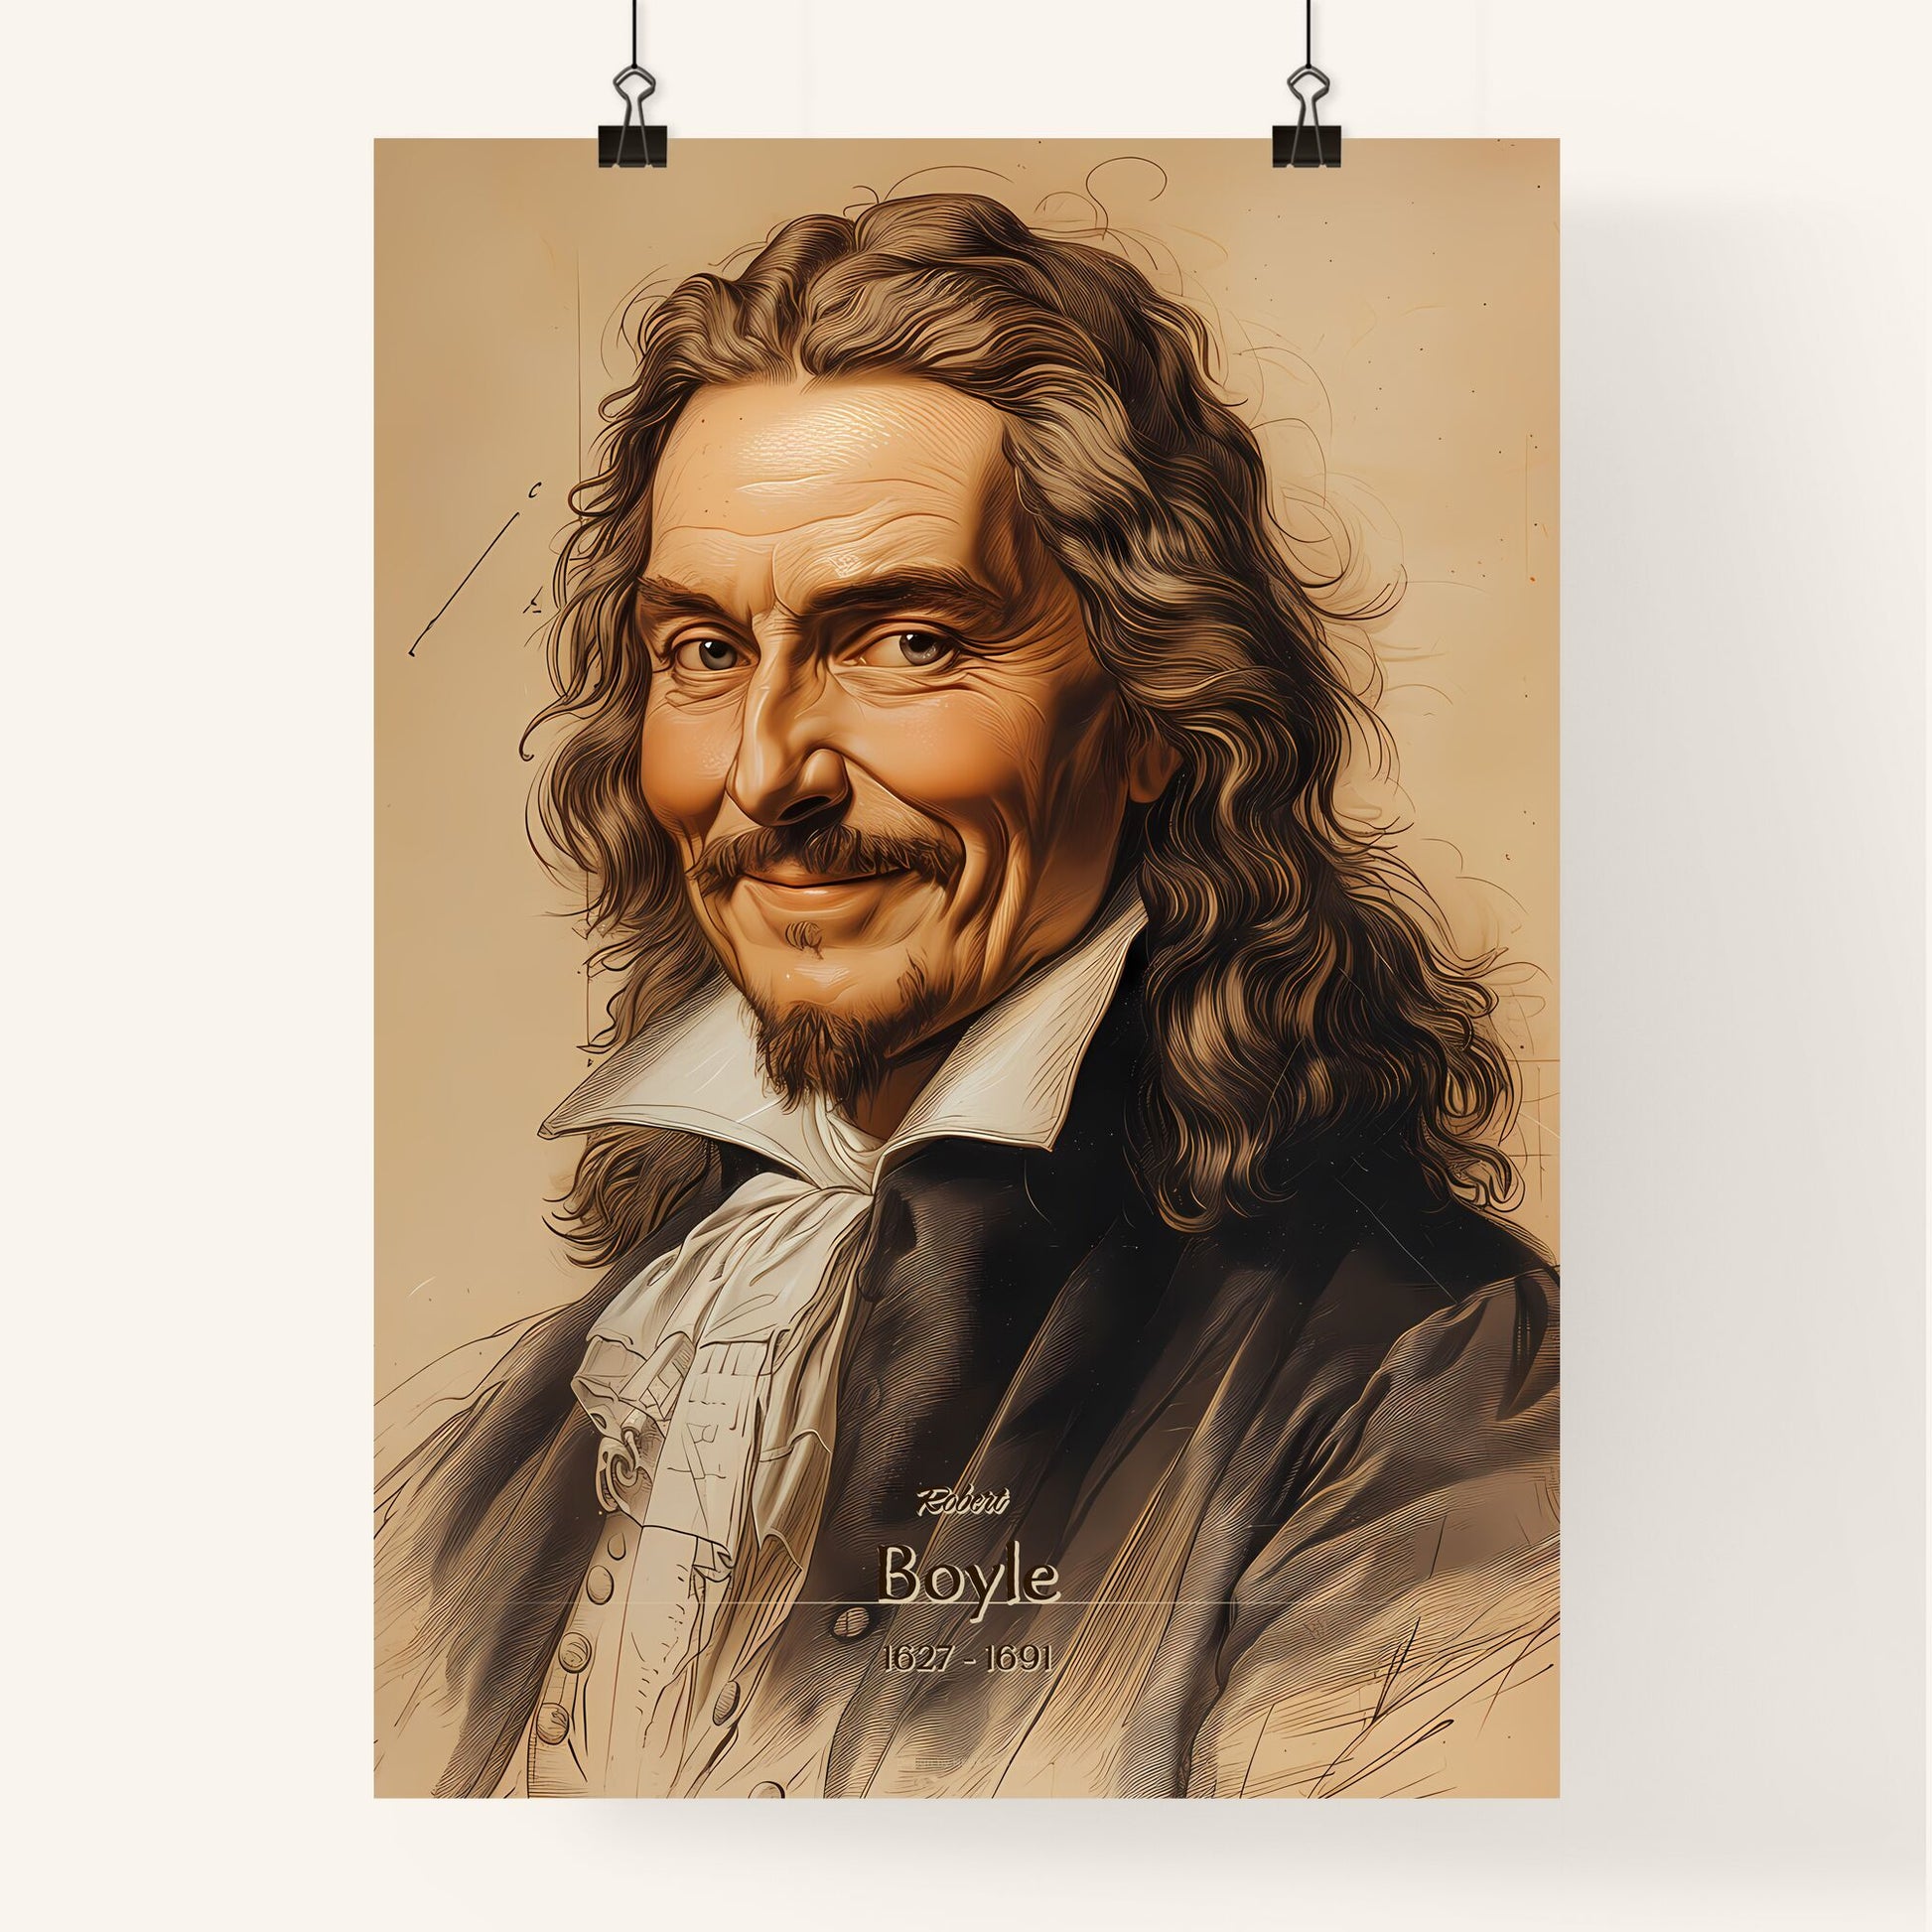 Robert, Boyle, 1627 - 1691, A Poster of a man with long hair and a mustache Default Title